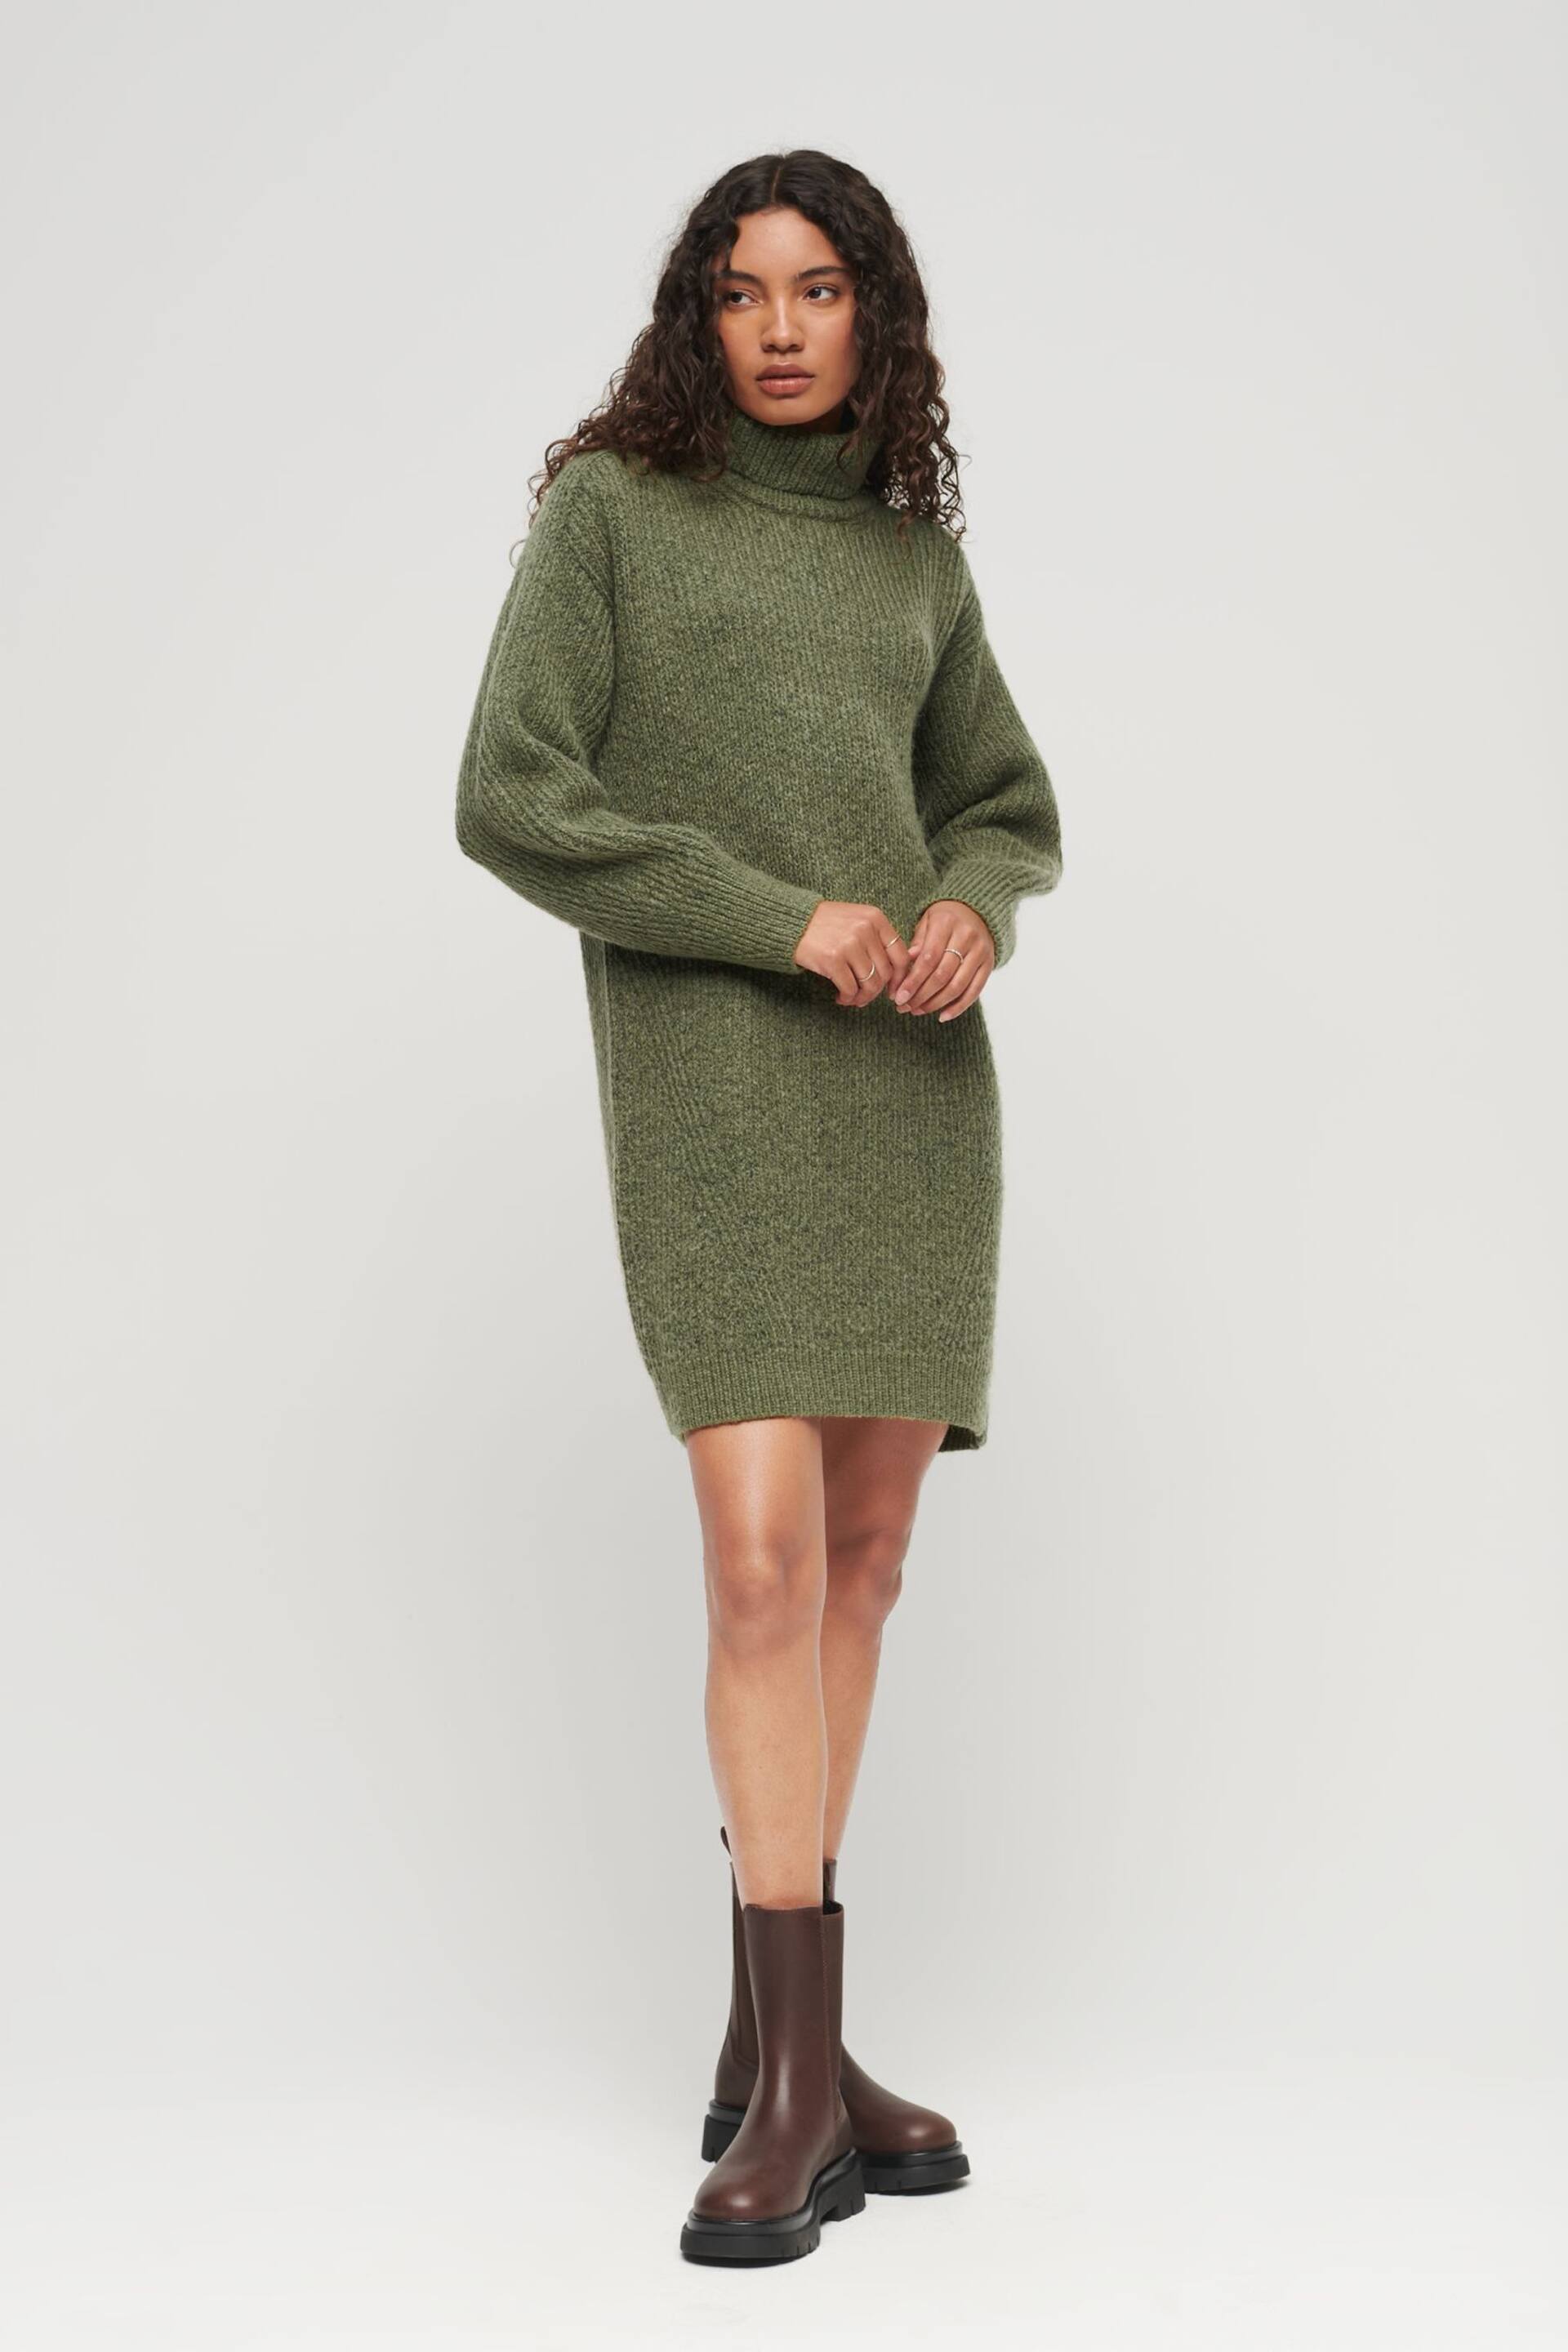 Superdry Green Knitted Roll Neck jumper Dress - Image 1 of 6